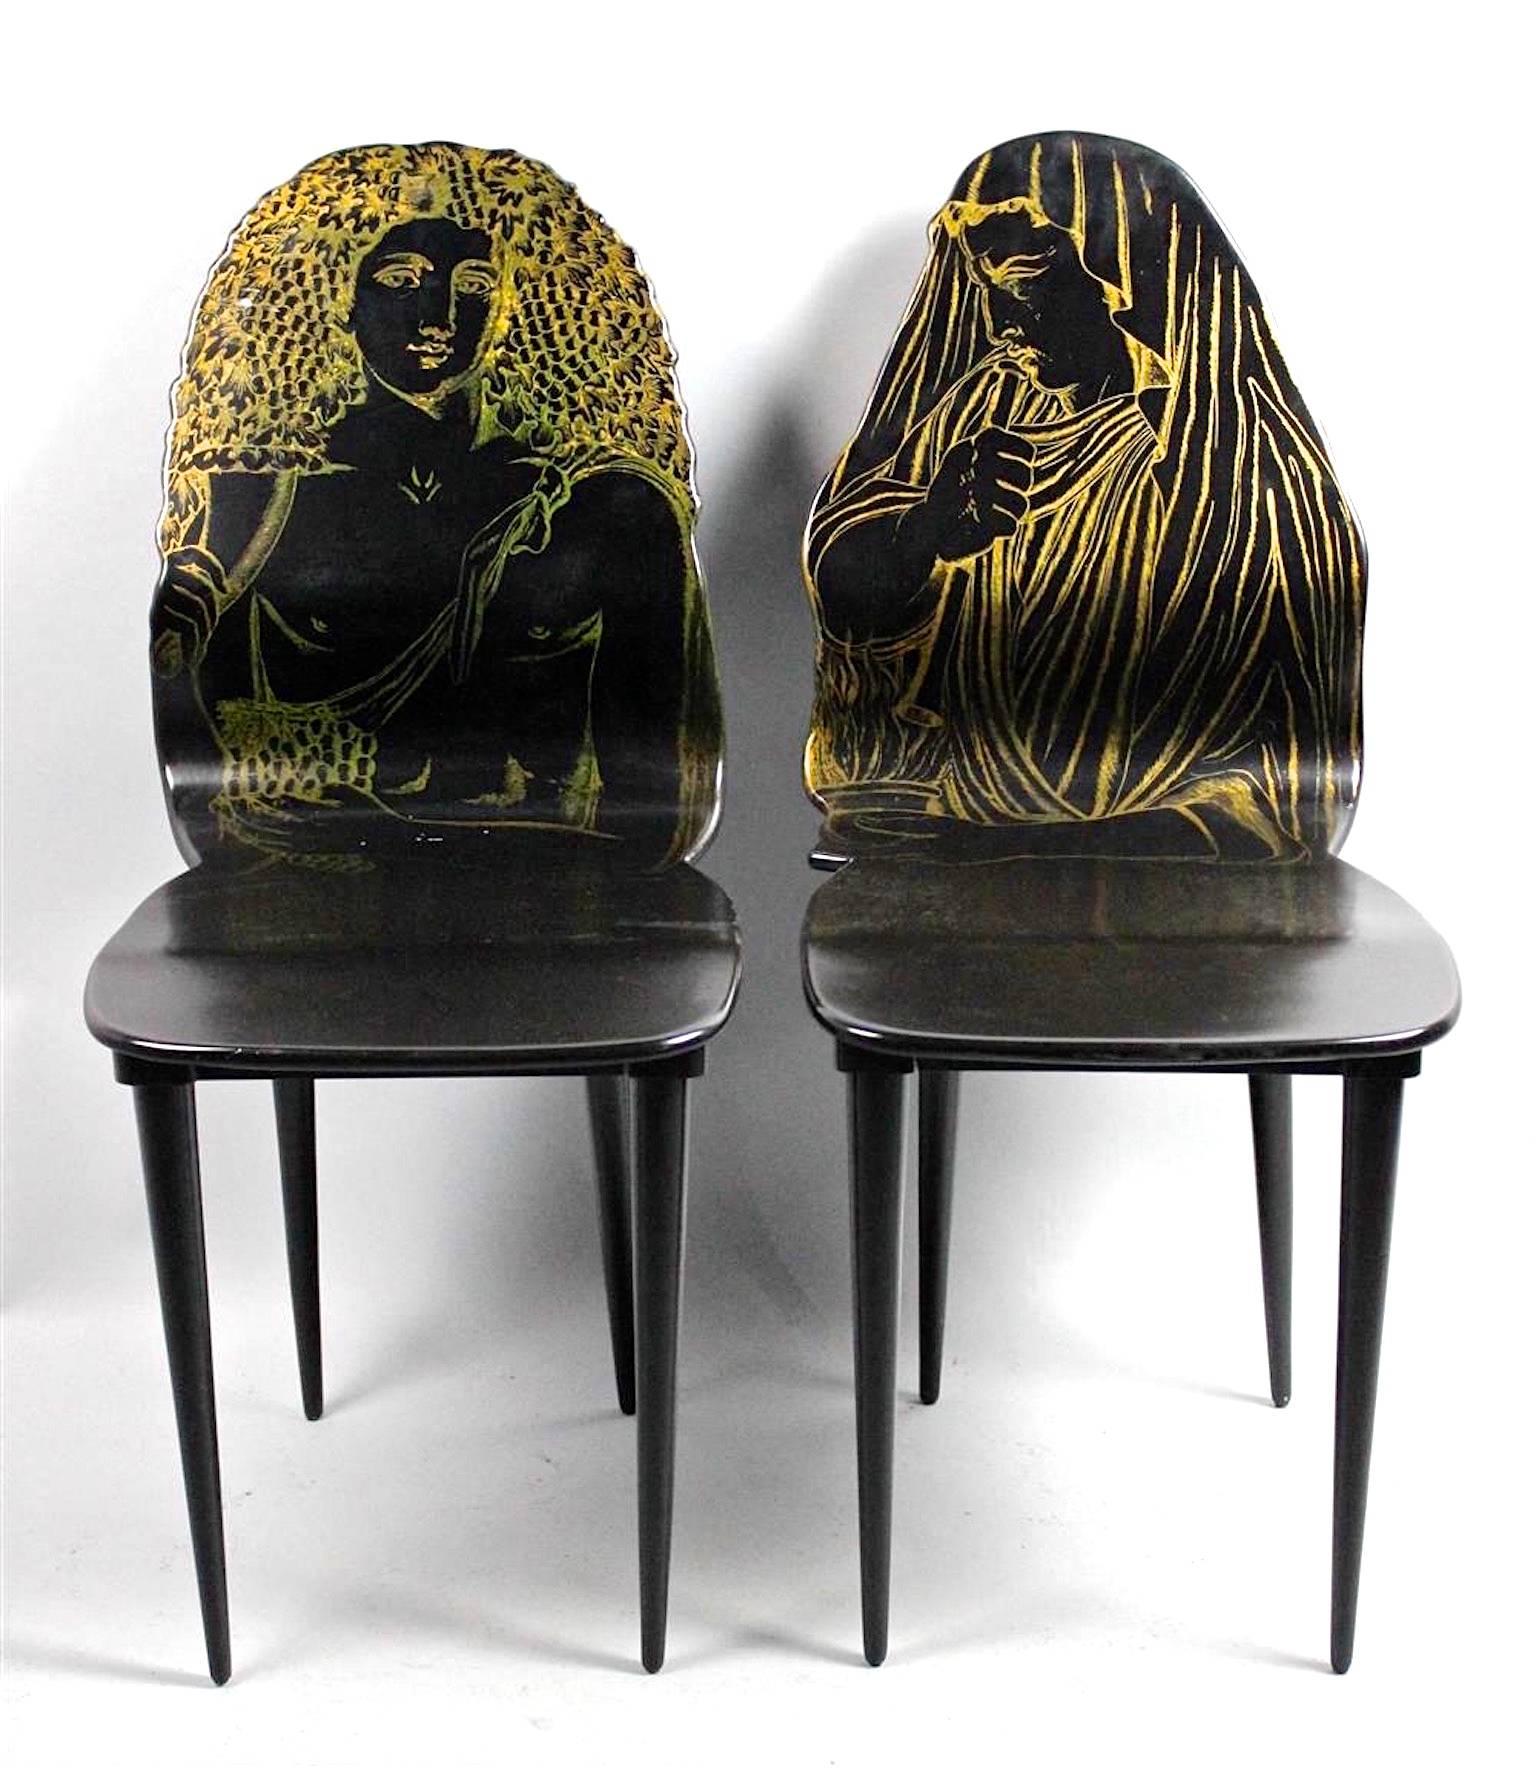 Pair of 1950's edition chairs by Piero Fornasetti from the Quattro Stagione series. Signed Fornasetti Milano. Black and gold lithographically printed.
Inverno and Autunno.

Authenticated by Barnaba Fornasetti as original first production. 